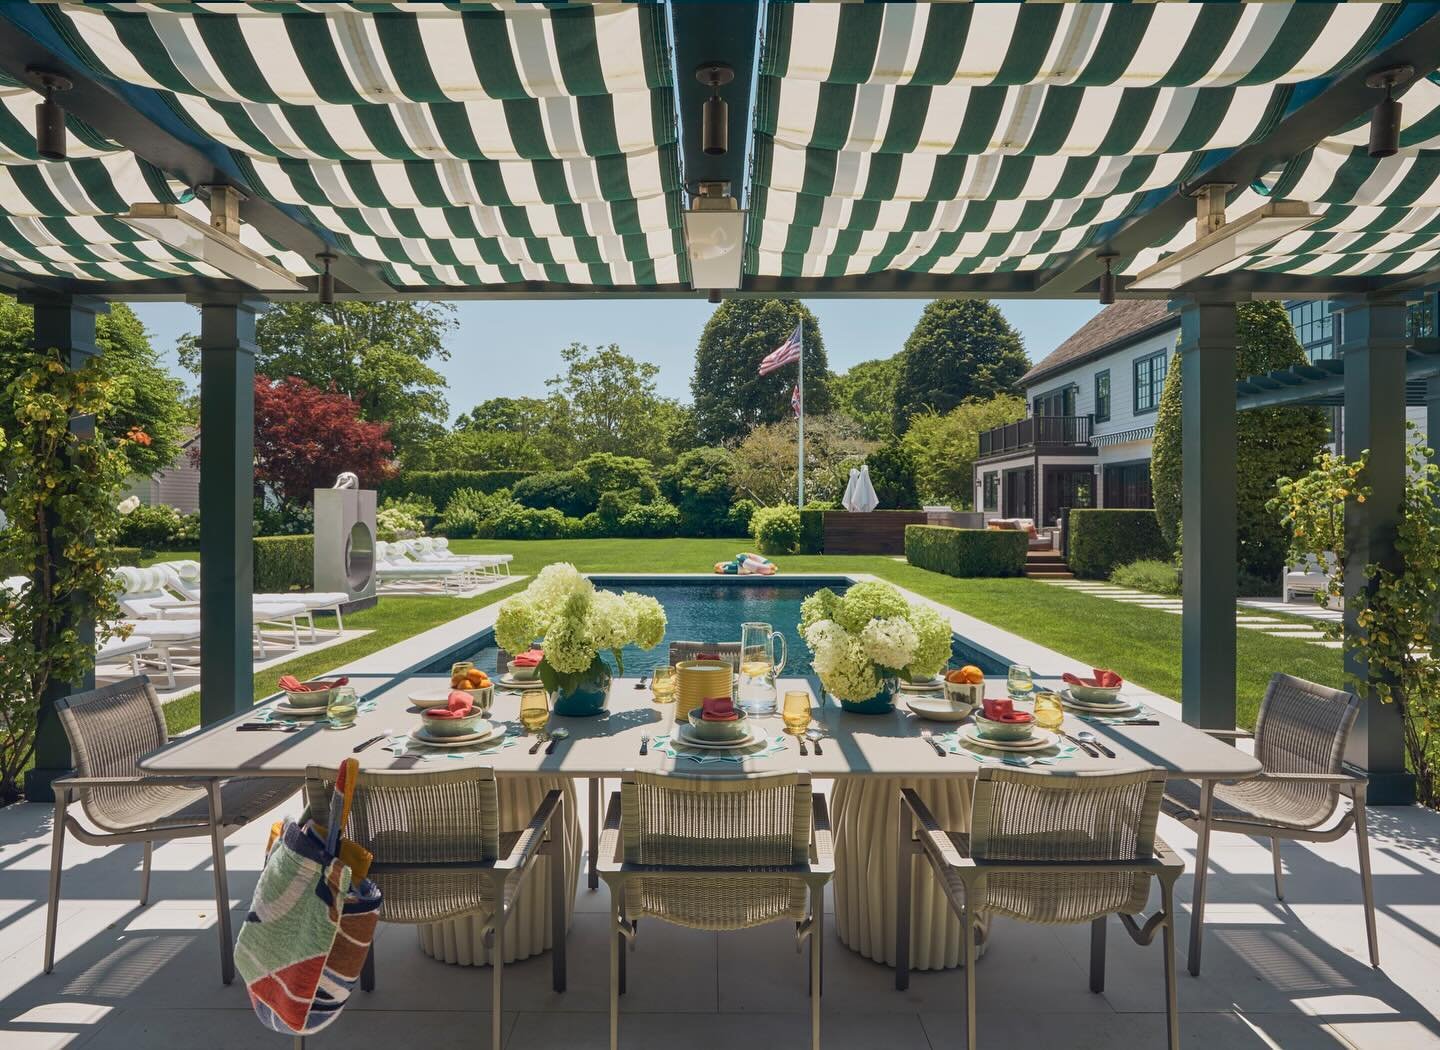 Outdoor dining in an East Hampton family compound. 

Design by @torreyllc 
Landscape design by @laguardia_design 
Photograph by @manoloyllera 
Lifestyle by @emmaforbeslifestyle 
Construction by @telemarkinc